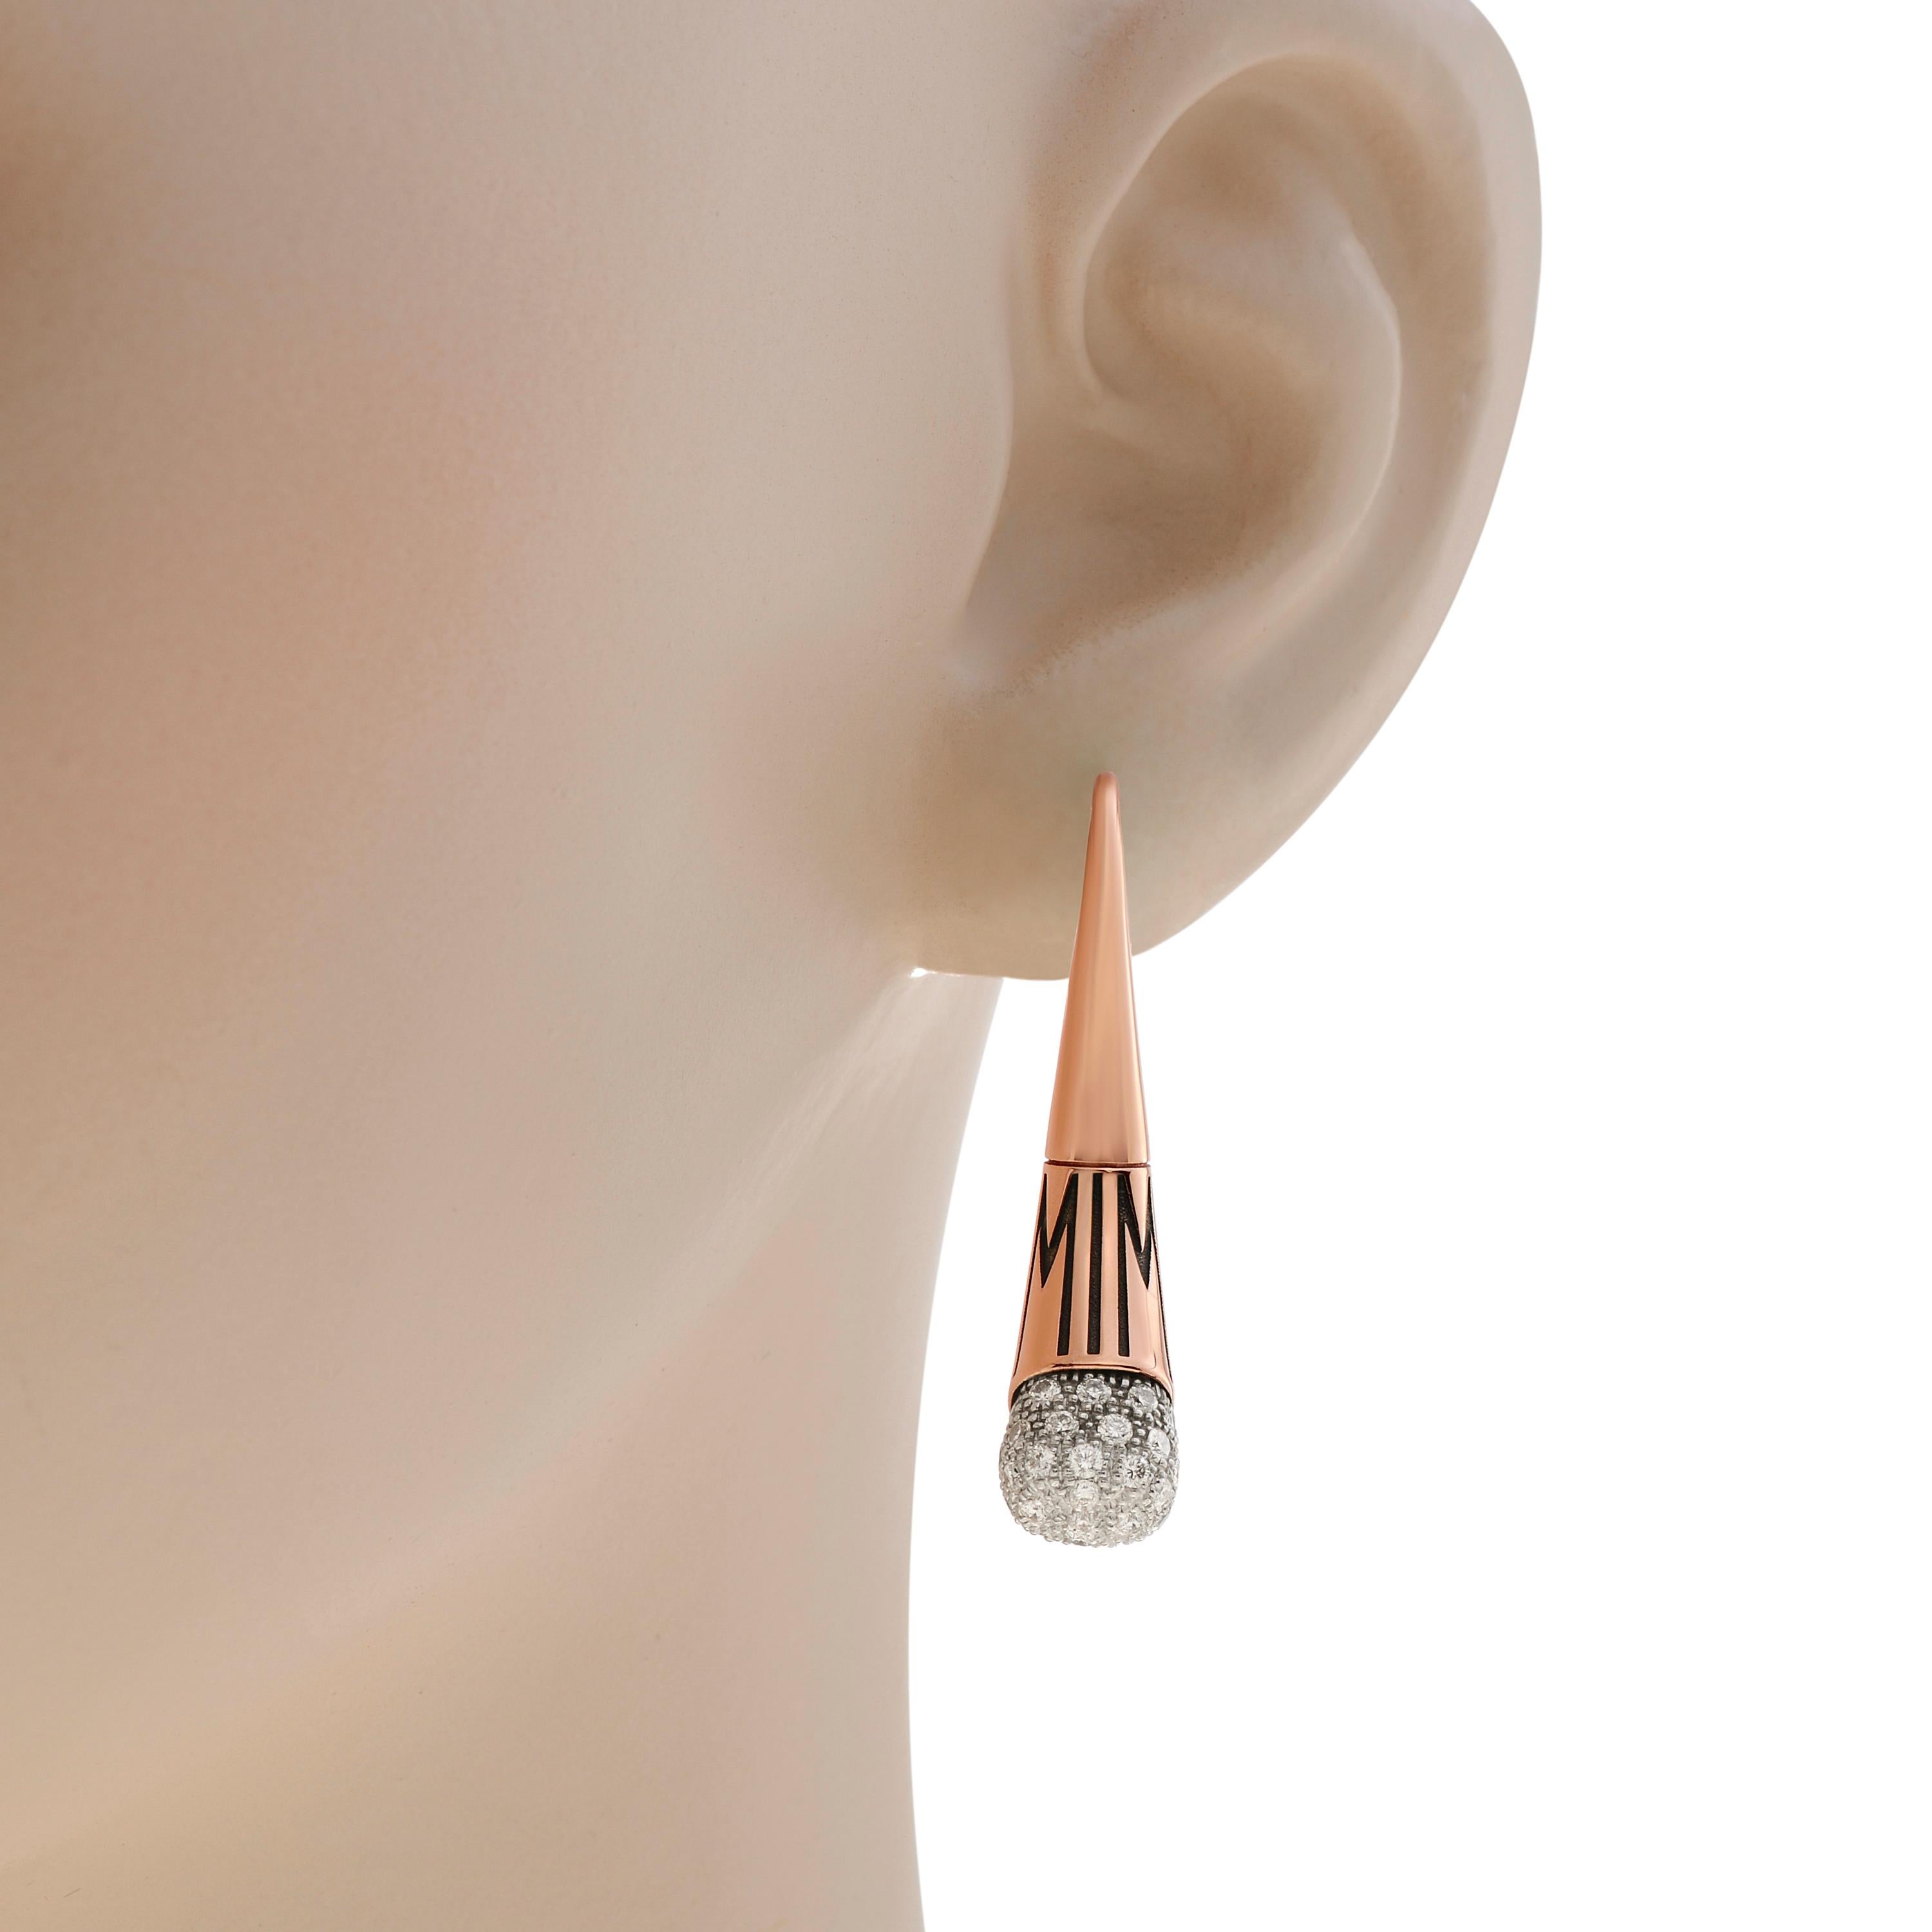 Mimi Milano 18K Rose Gold and 18k White Gold Drop Earrings feature 1.4ct. tw. in rose gold with an iconic 